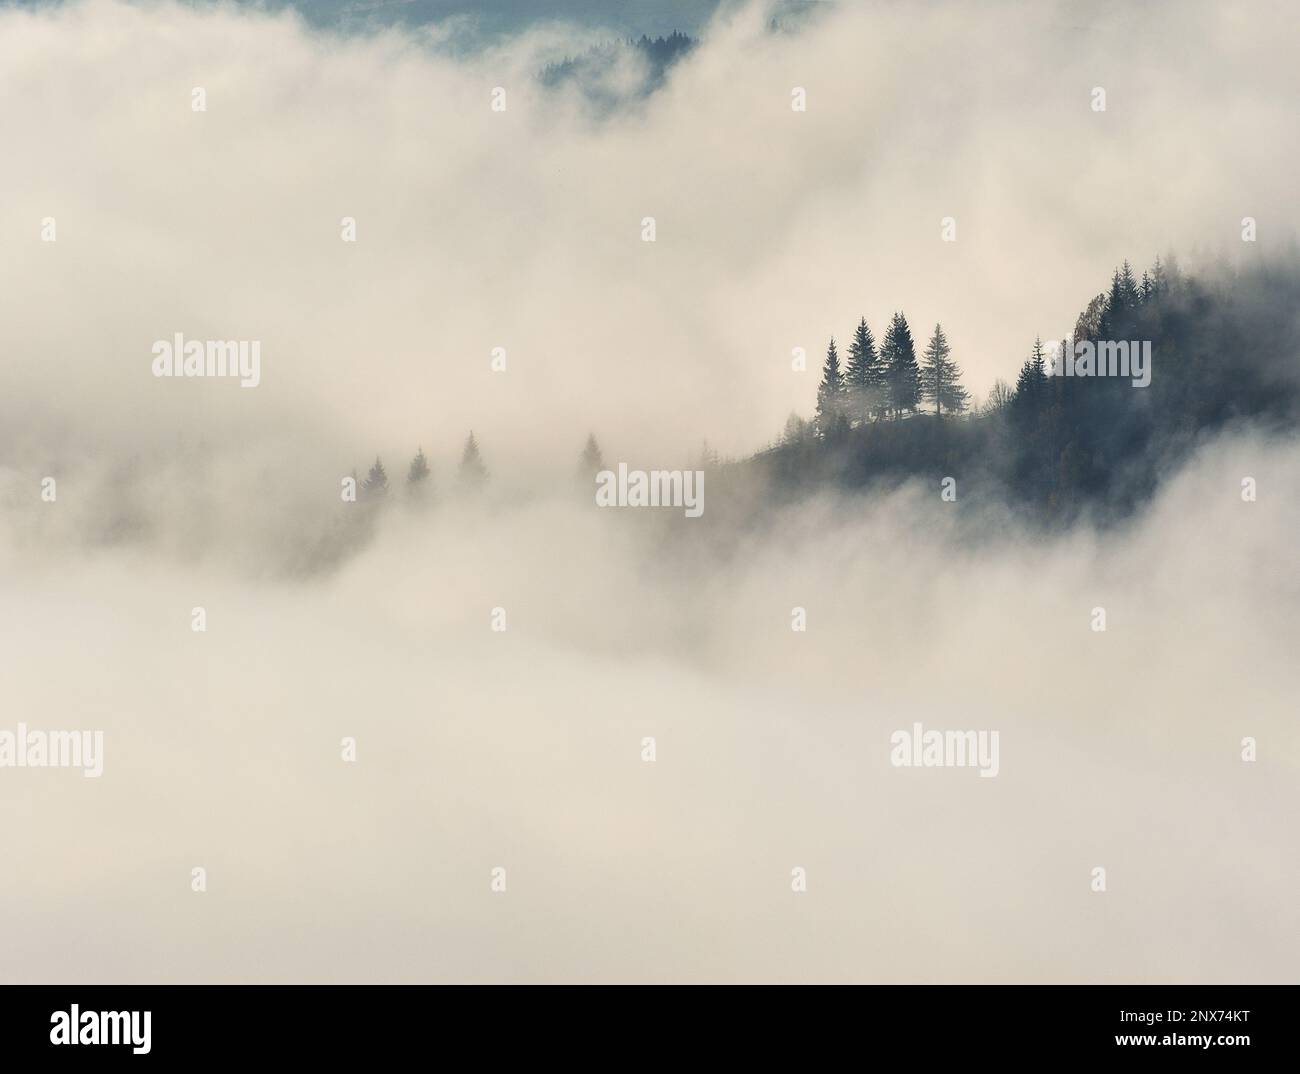 Mountain silhouettes in the fog. Graphic landscape on the theme of mountains Stock Photo